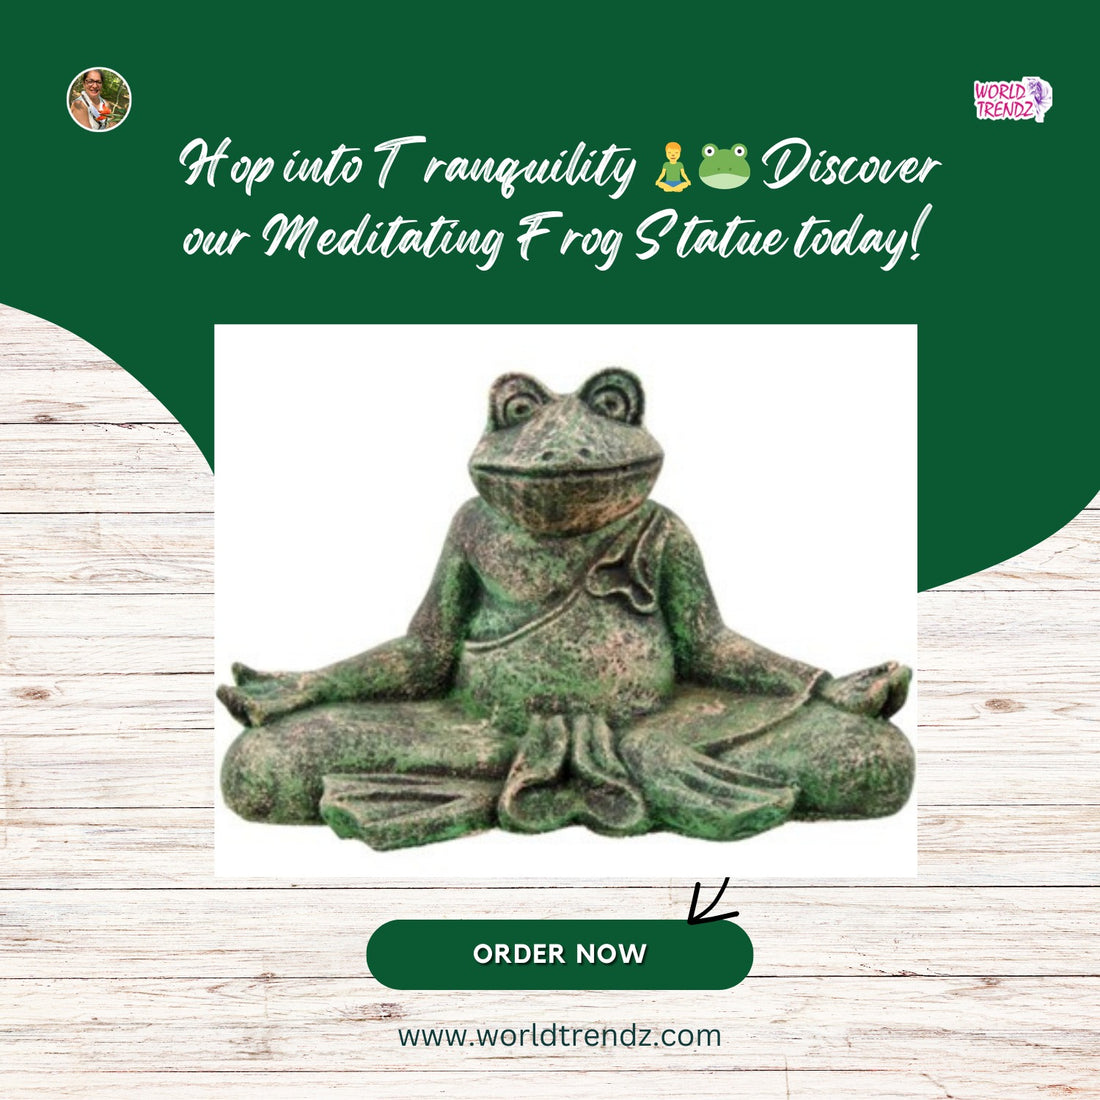 The Meditating Frog Statue: A Serene Symbol of Peace and Enlightenment